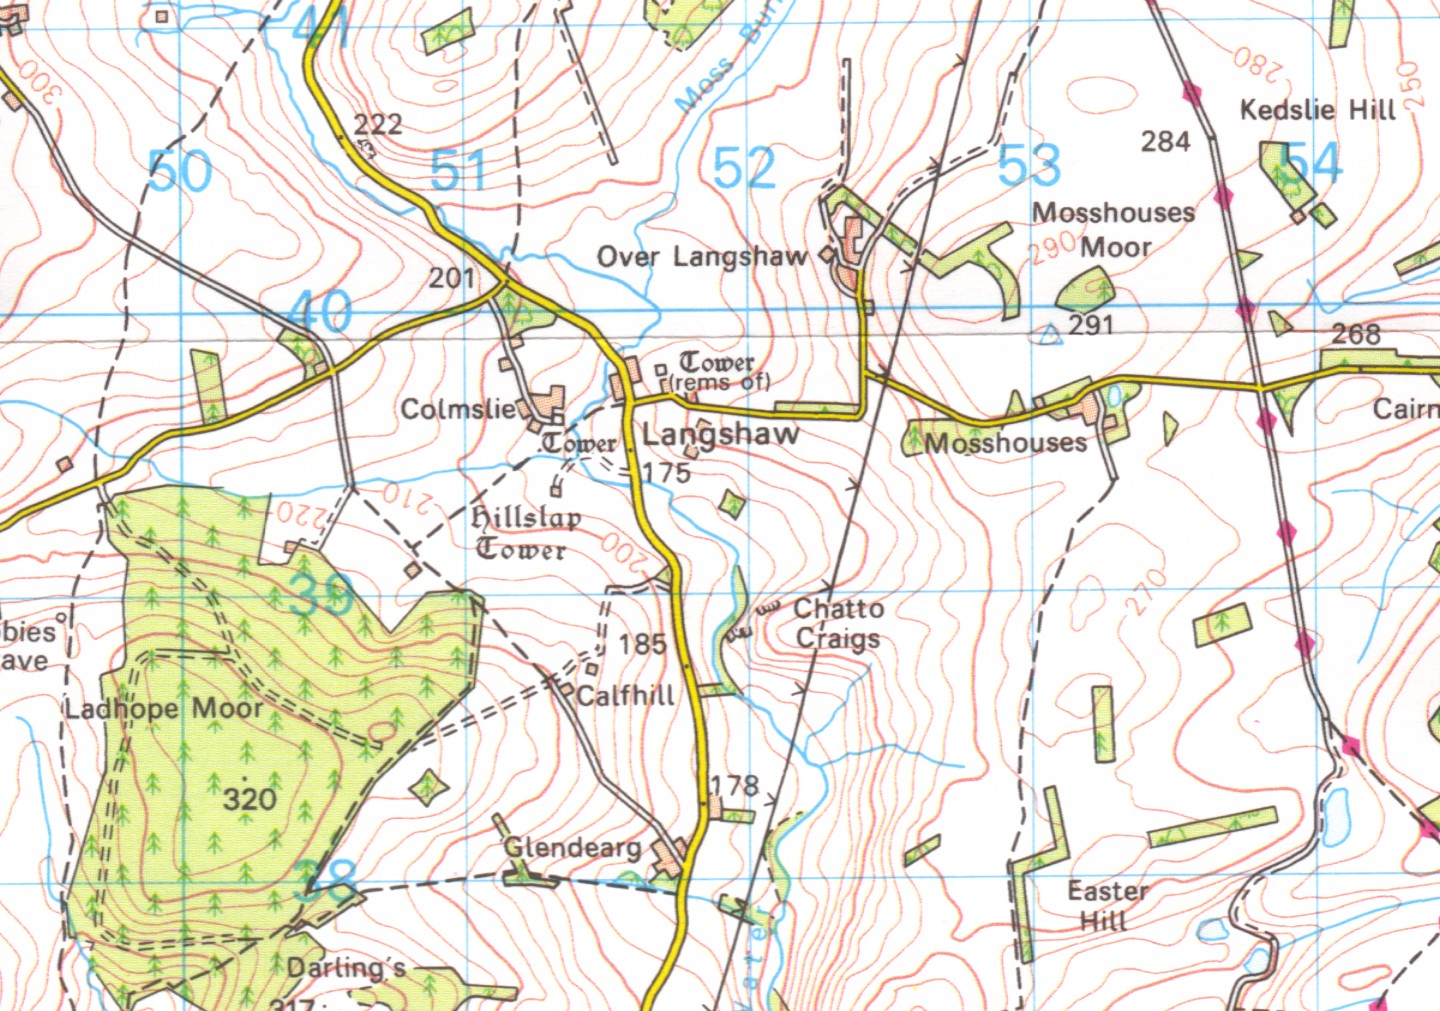 Map of Colmslie, Glendearg, Langshaw and Hilslap Tower.